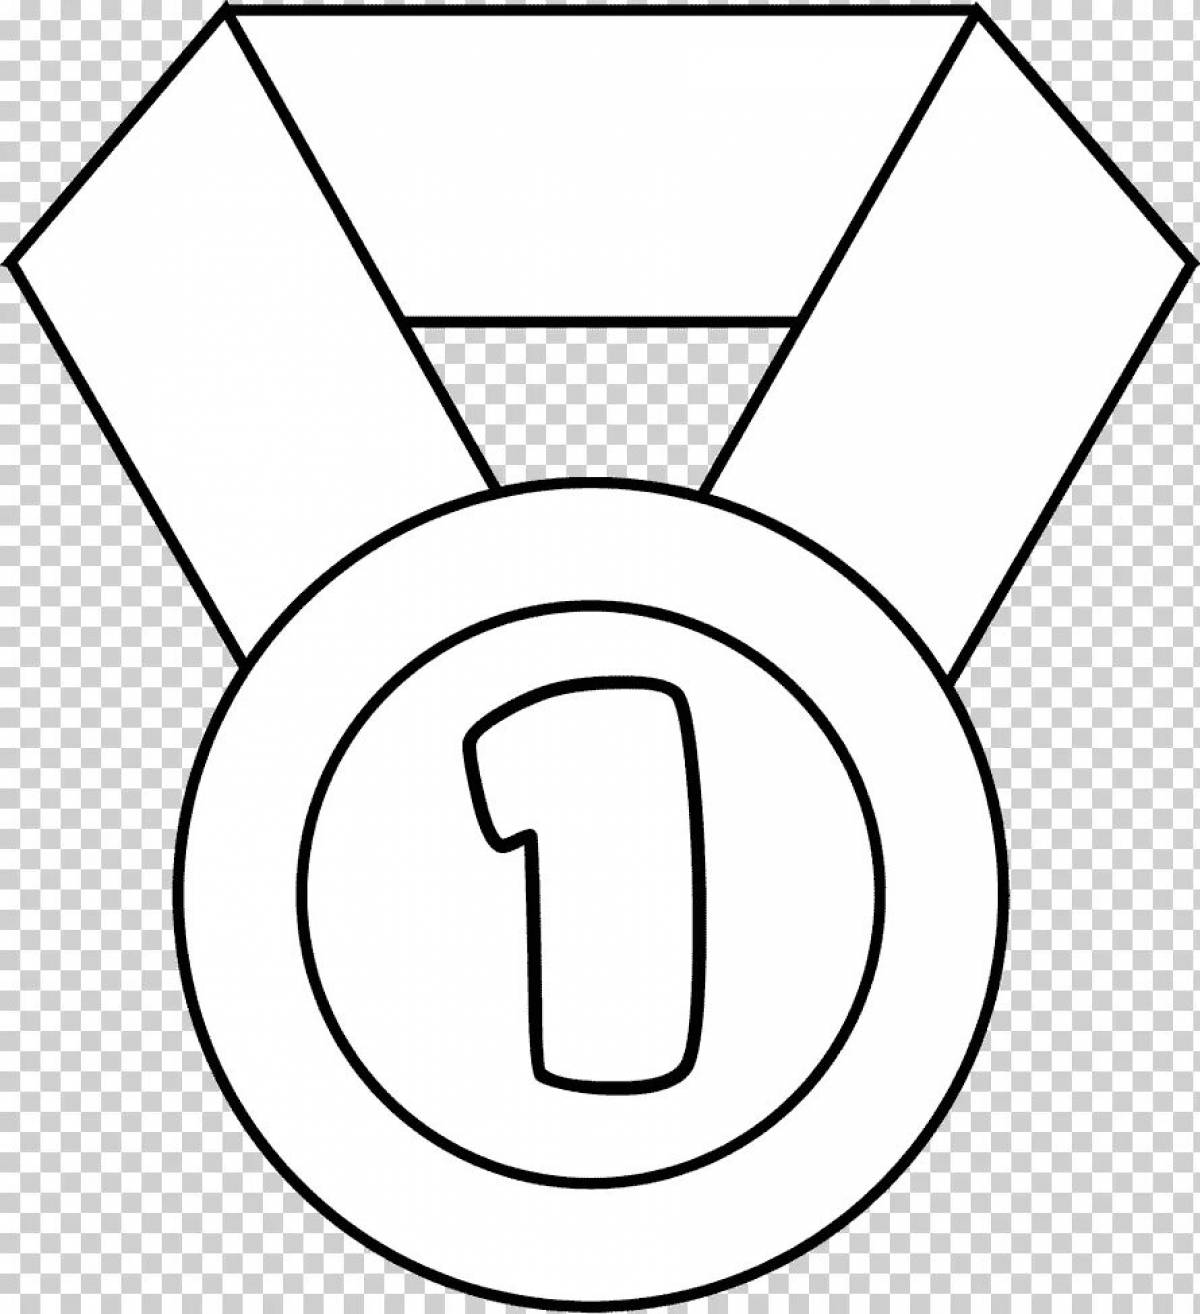 Medal template #2